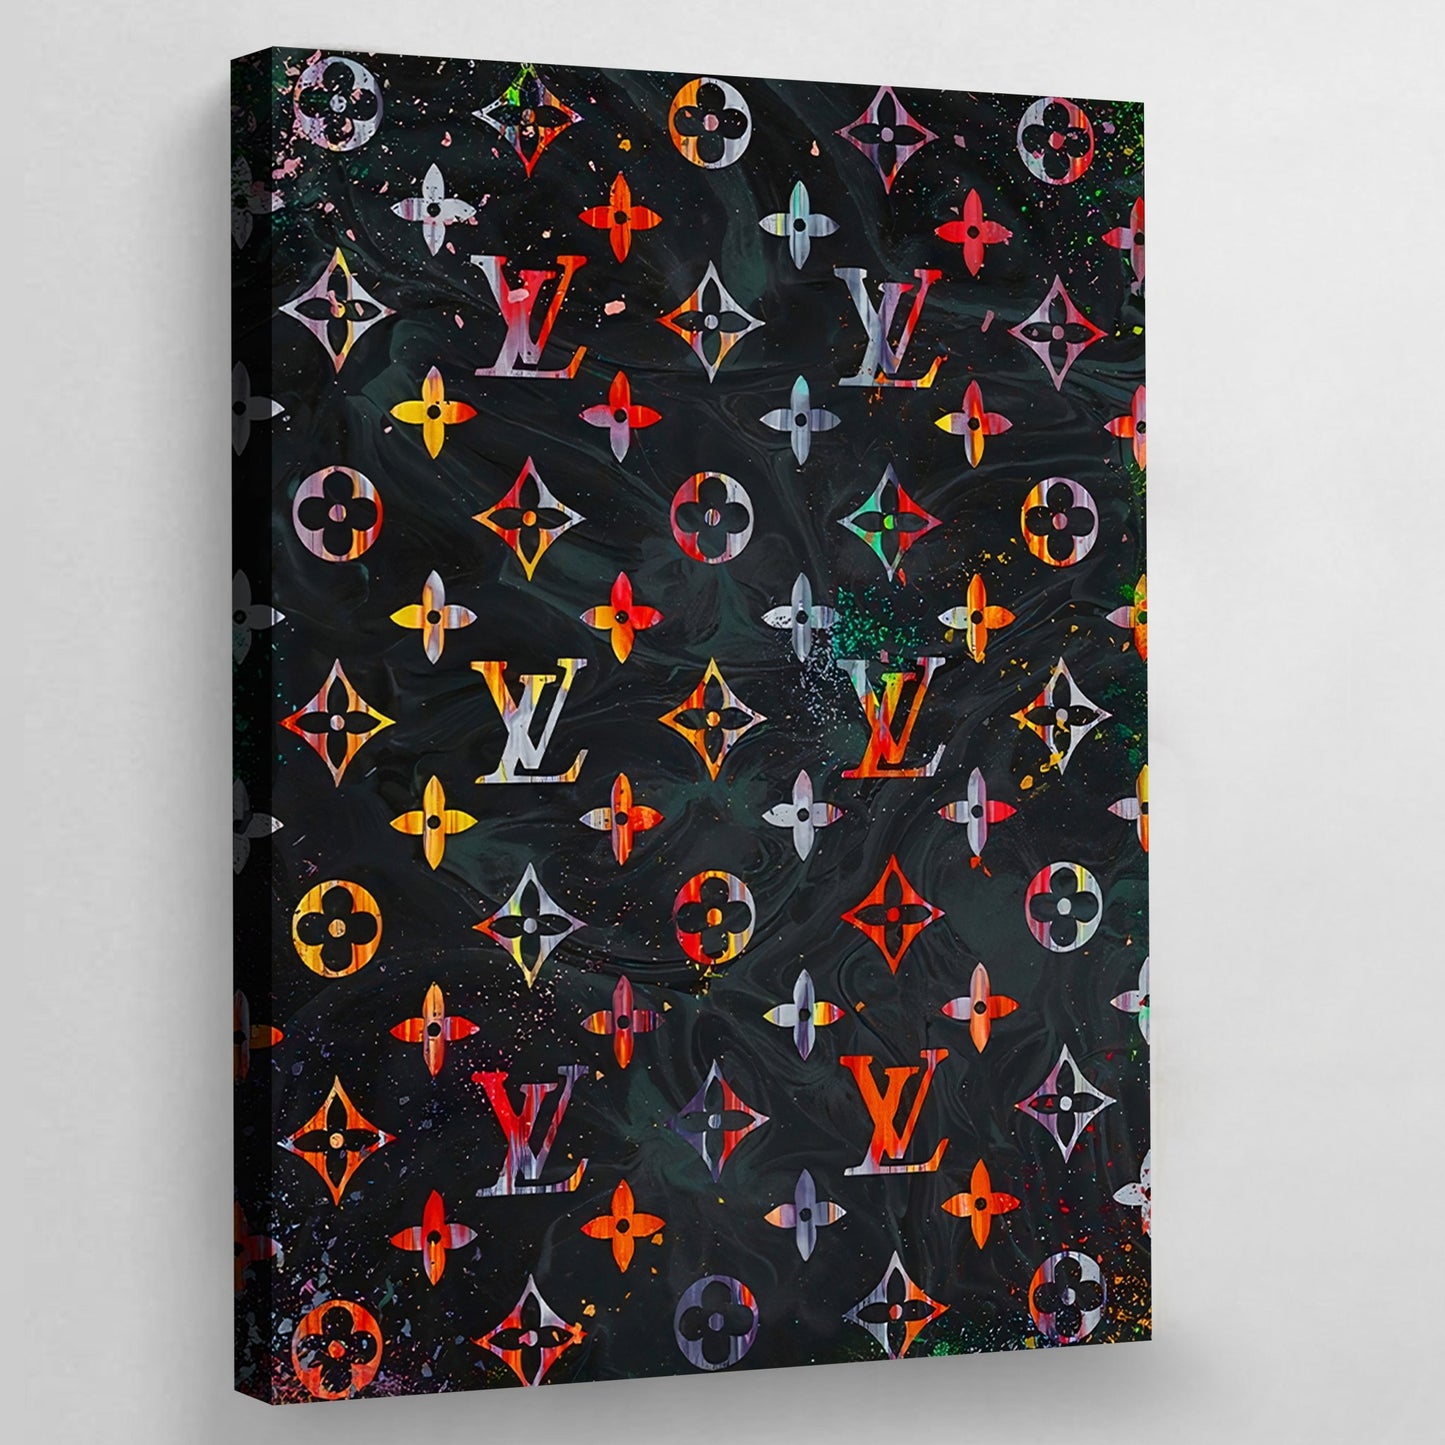 Louis Vuitton: A Passion for Creation